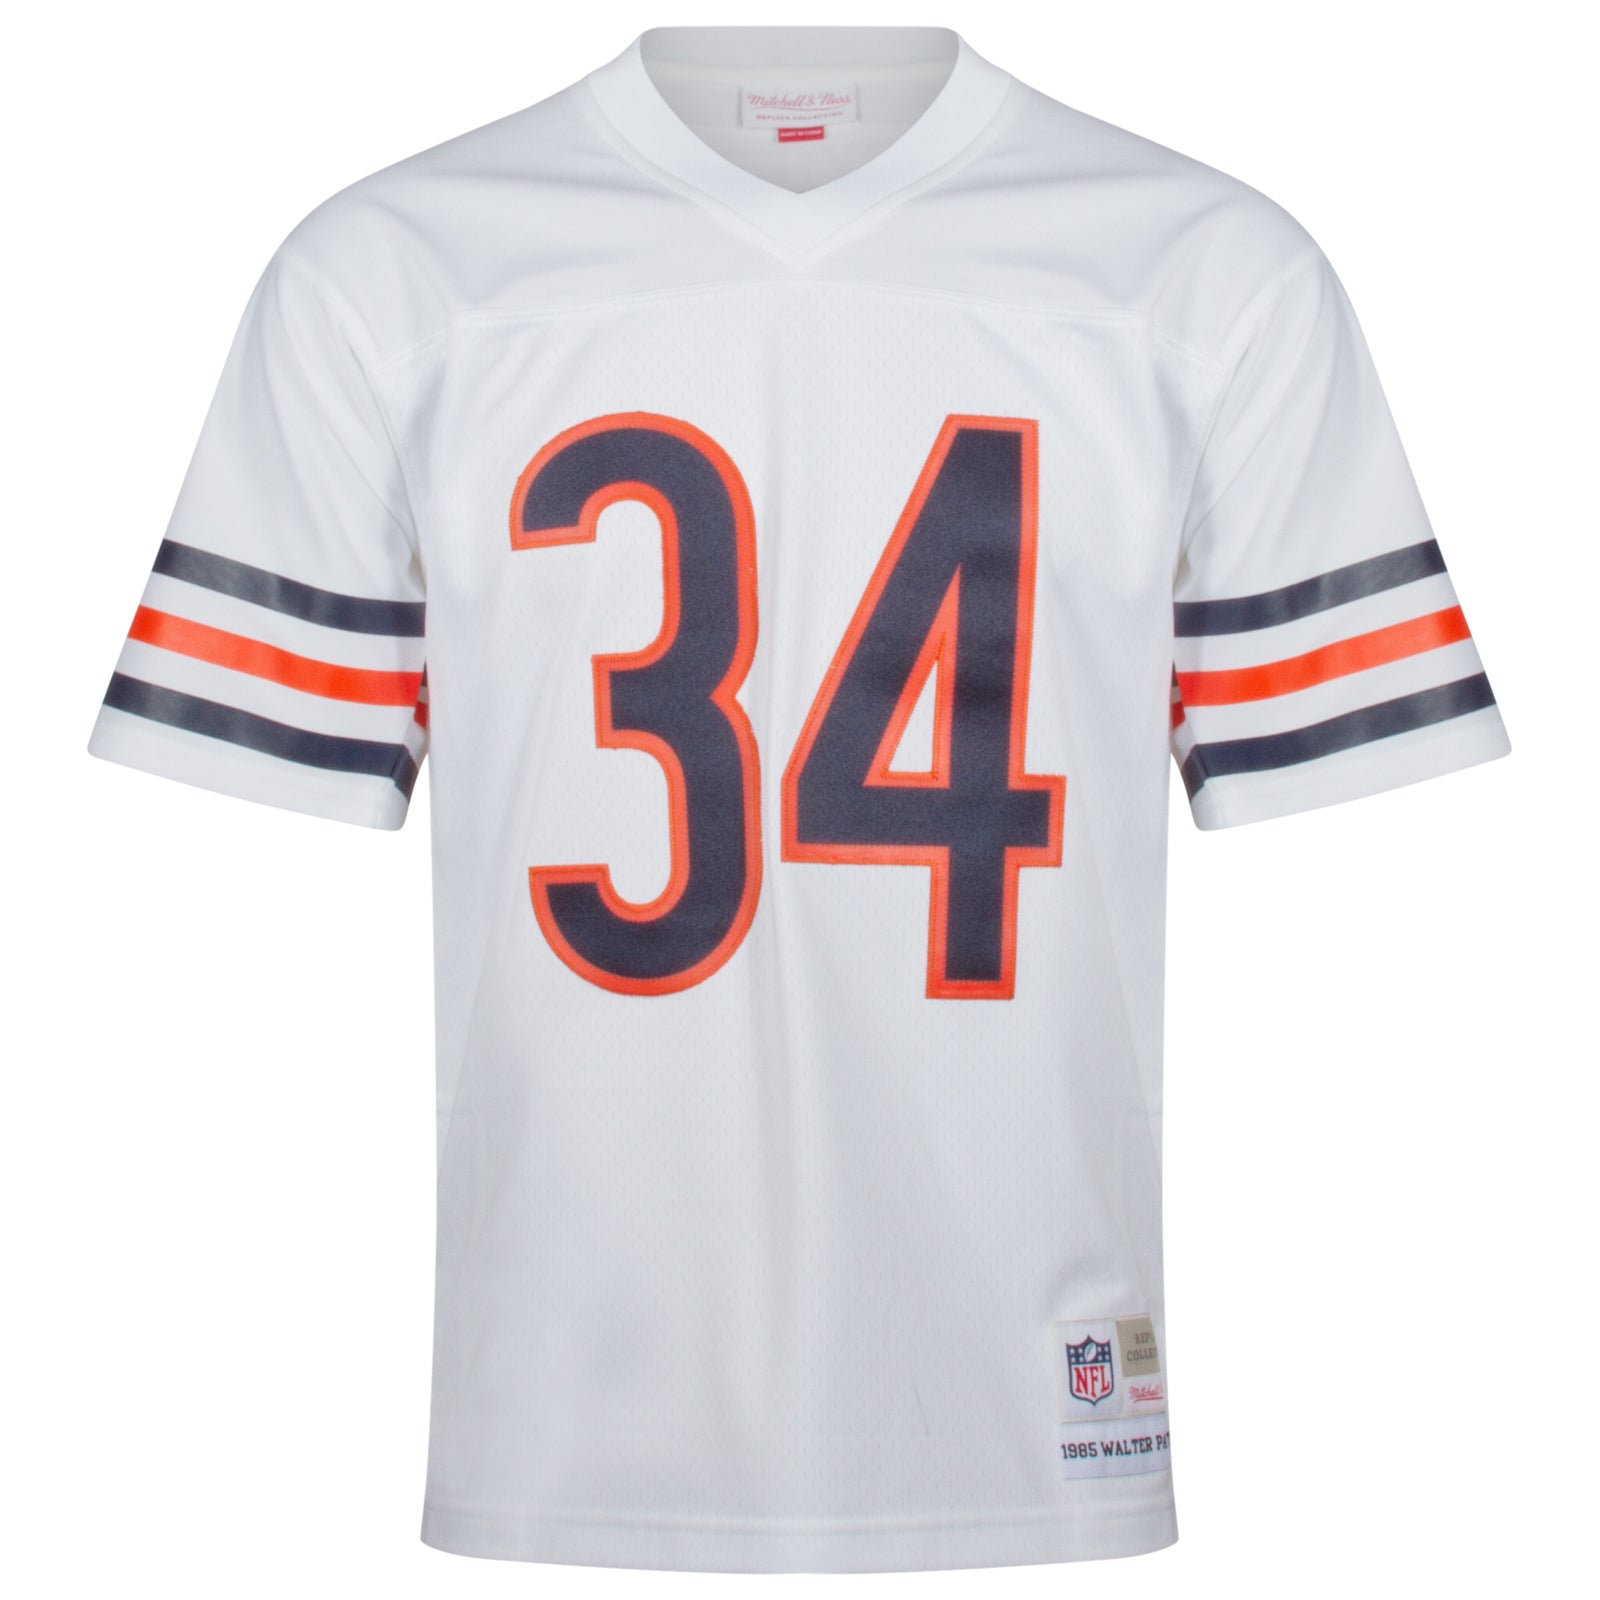 Bears No34 Walter Payton Men's White Nike Multi-Color 2020 Crucial Catch Limited Jersey